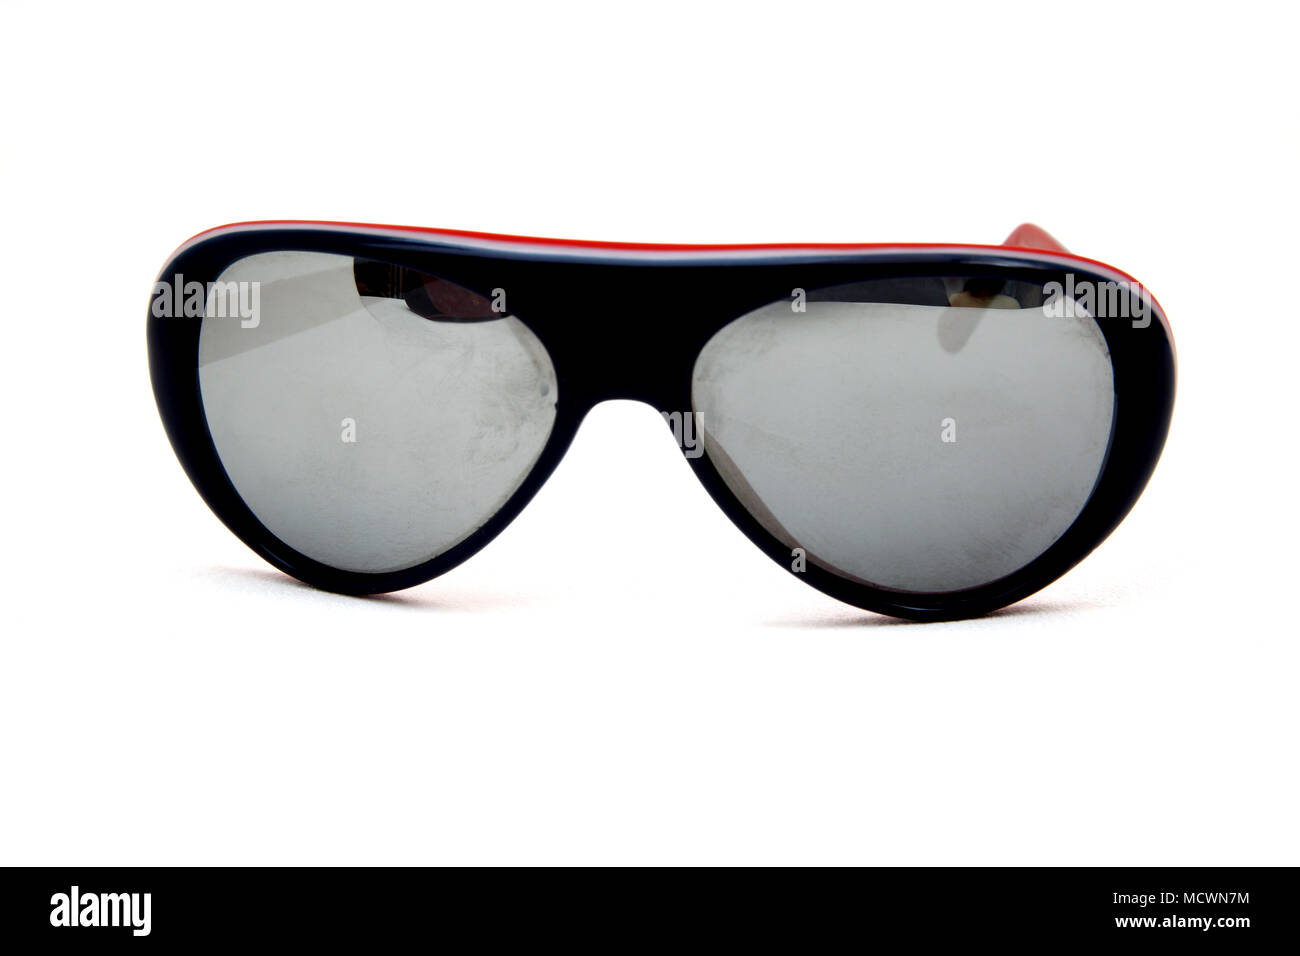 Vintage Mirrored Sunglasses with Red and Black Plastic Frames Stock Photo